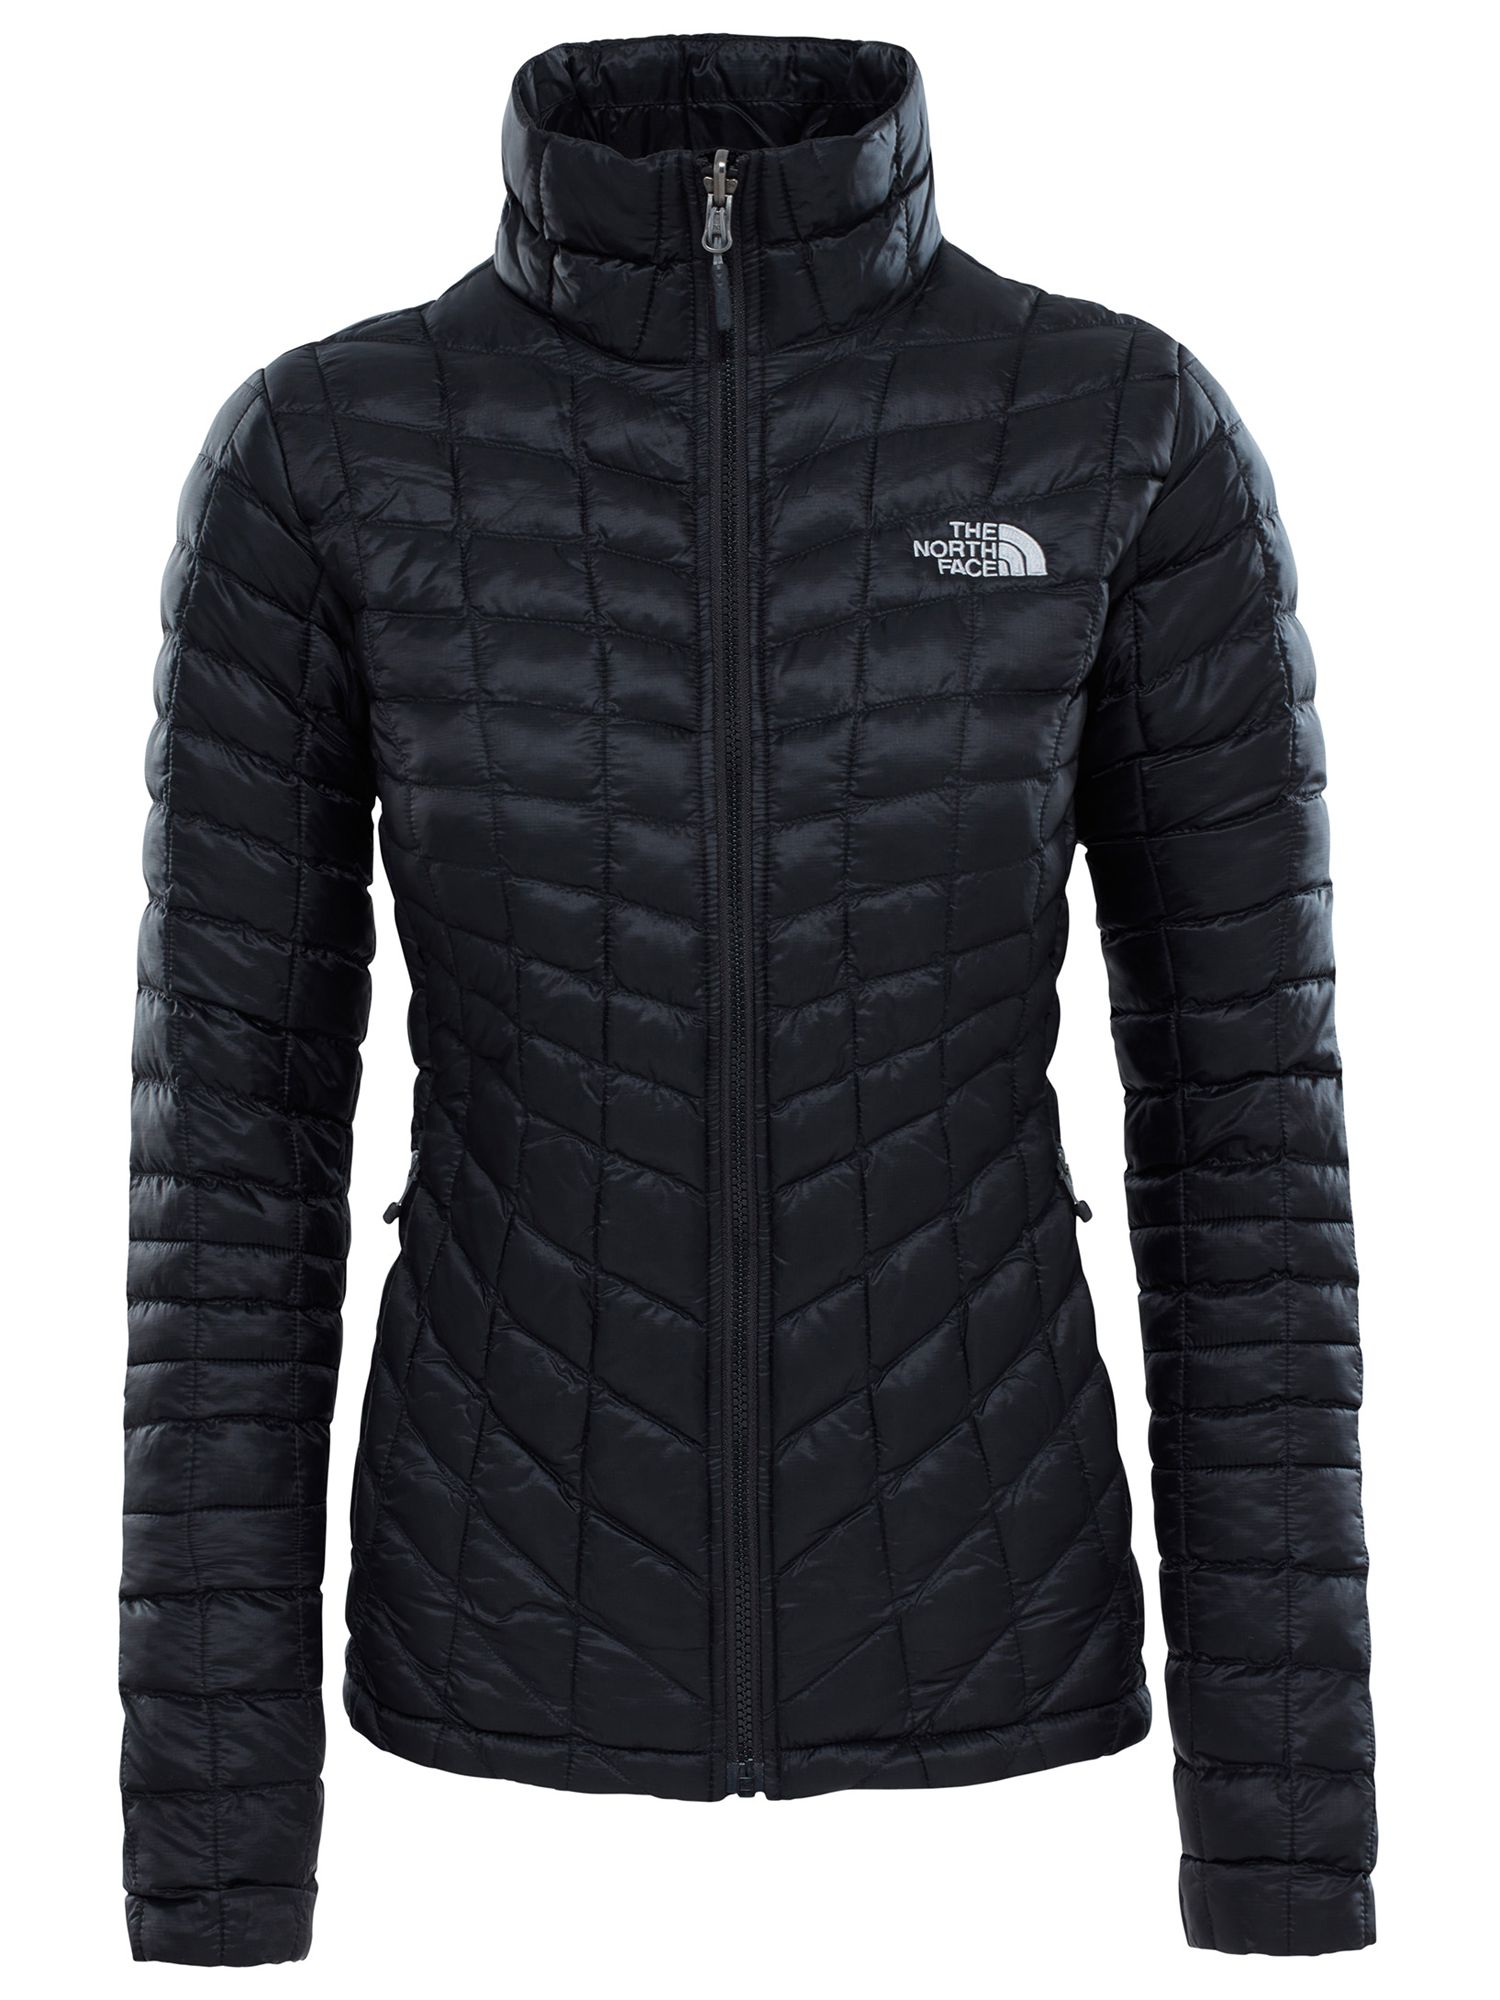 north face women's thermoball jacket sale